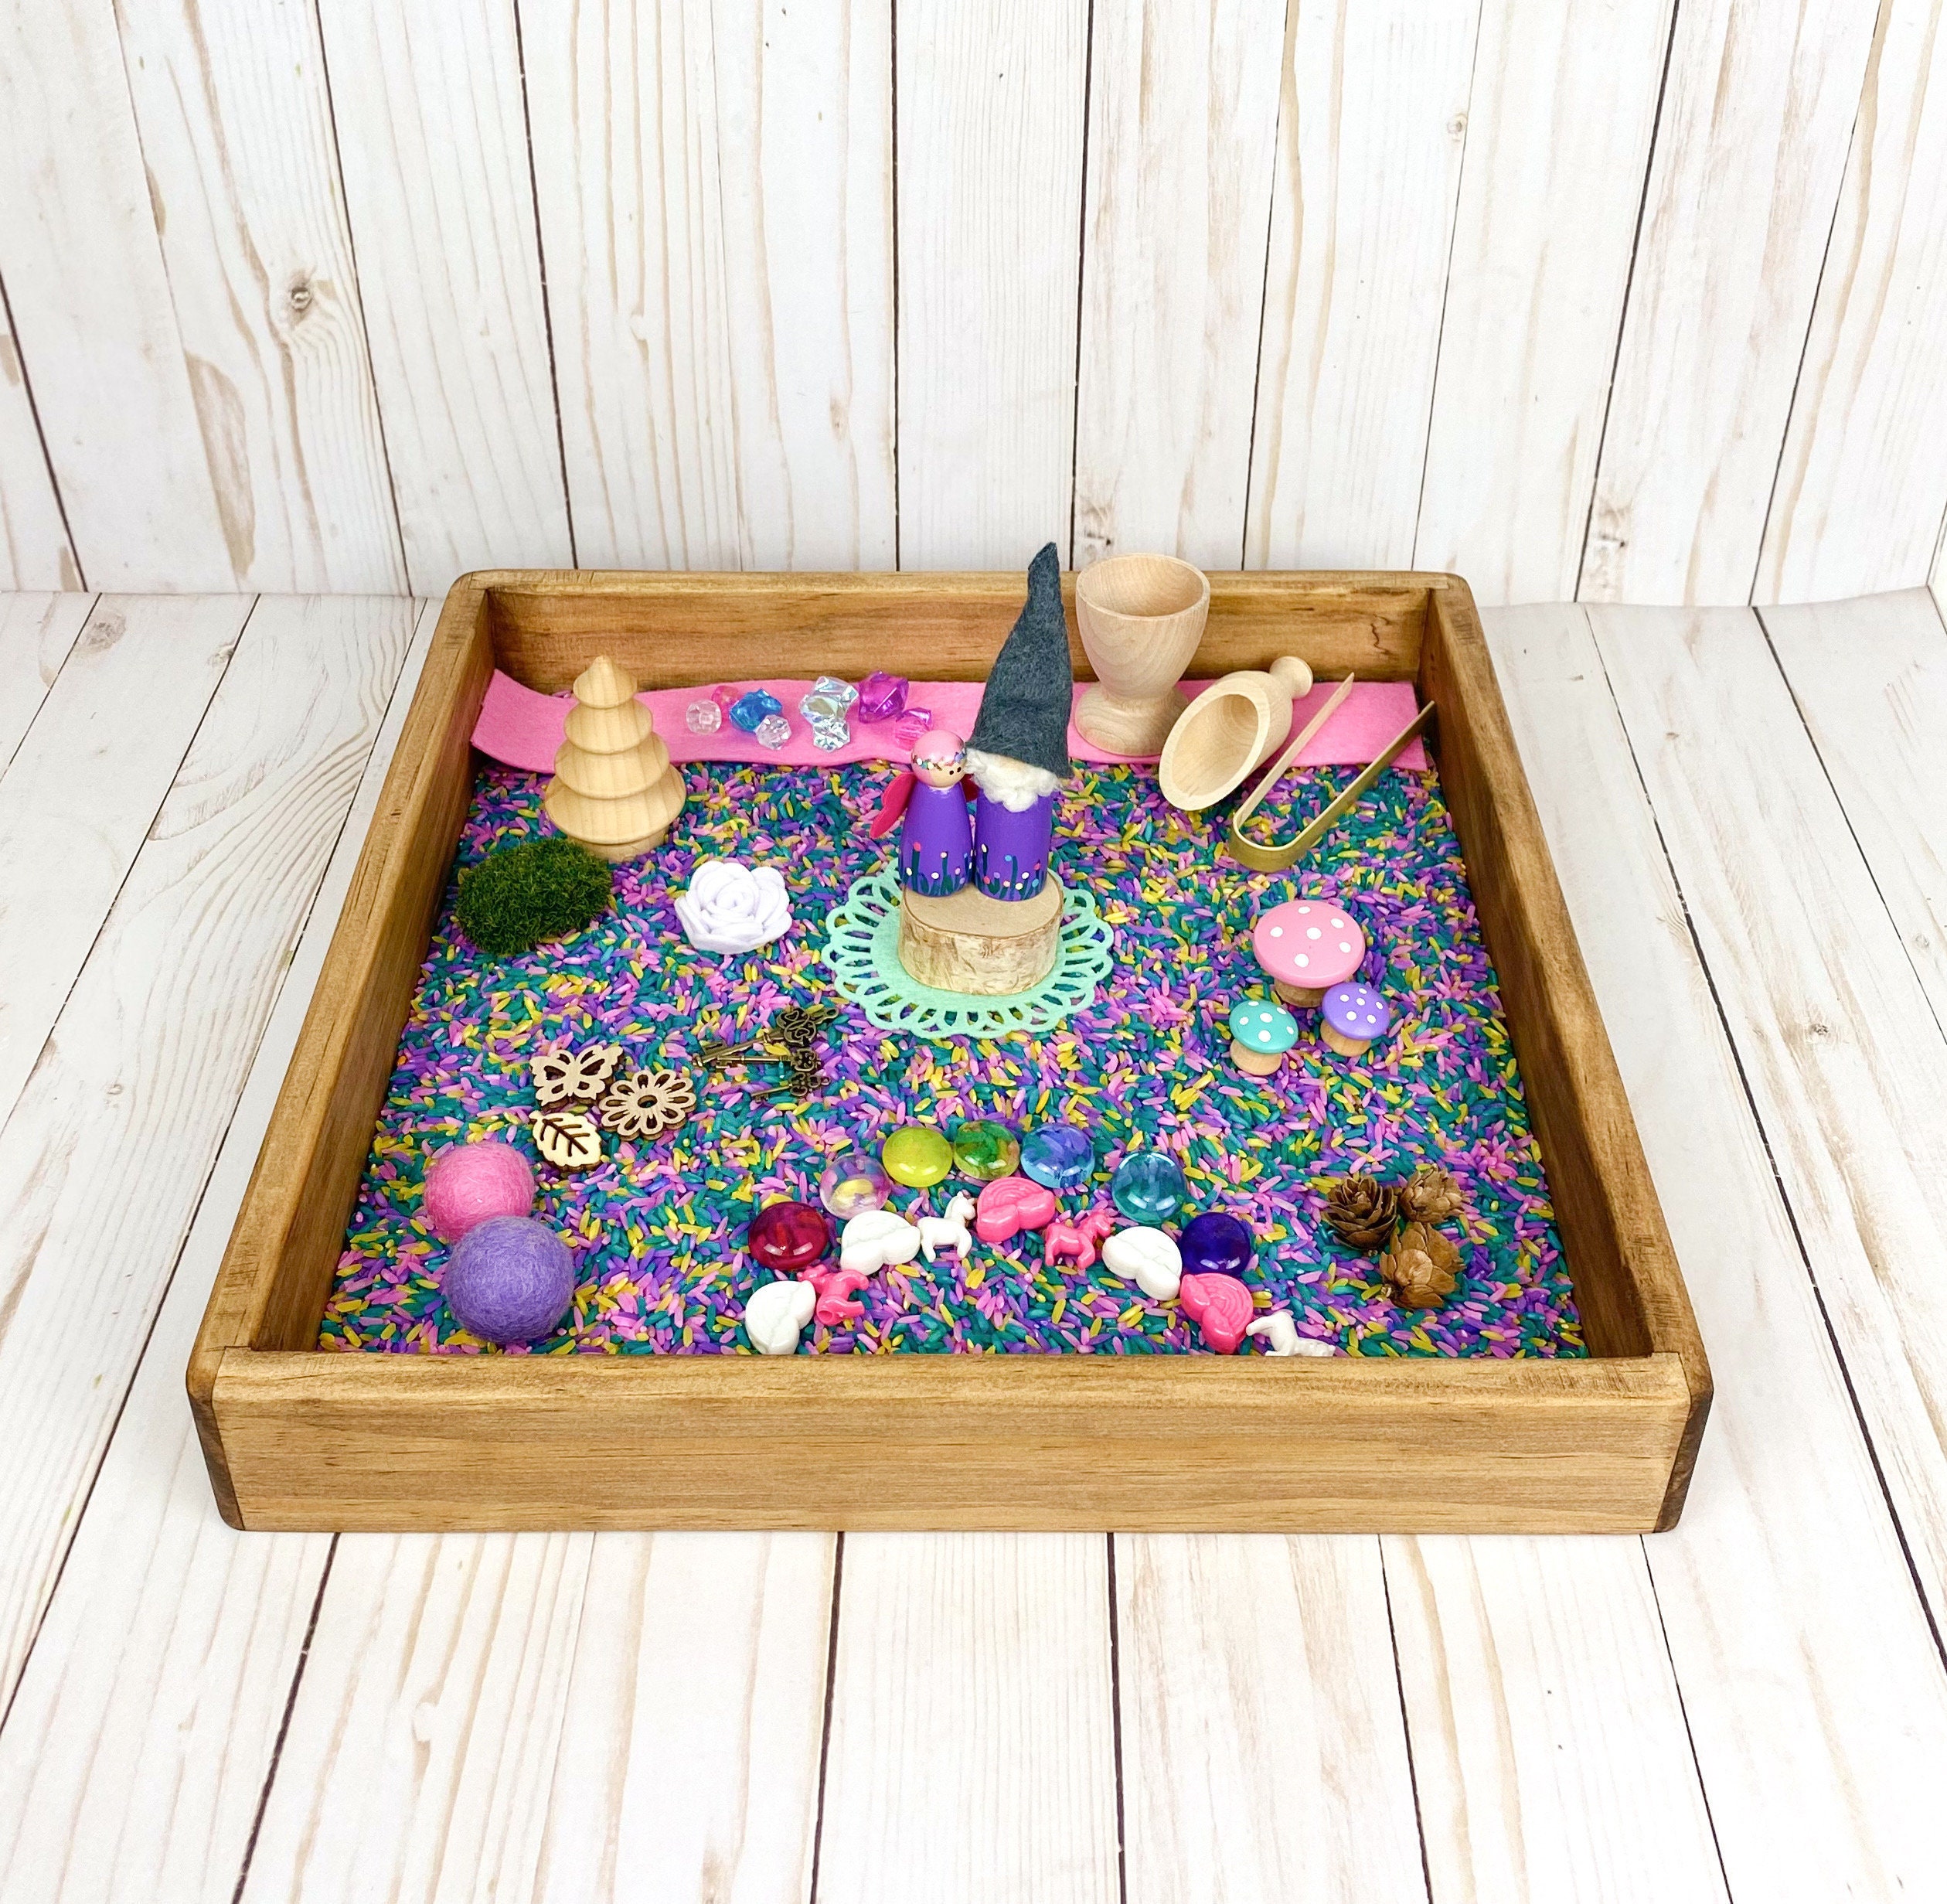 Space Sensory Bin Kit/small World Play/sensory Tray/loose Parts  Play/astronaut Wood Peg Doll/imaginative Play Kit/open Ended Toy 